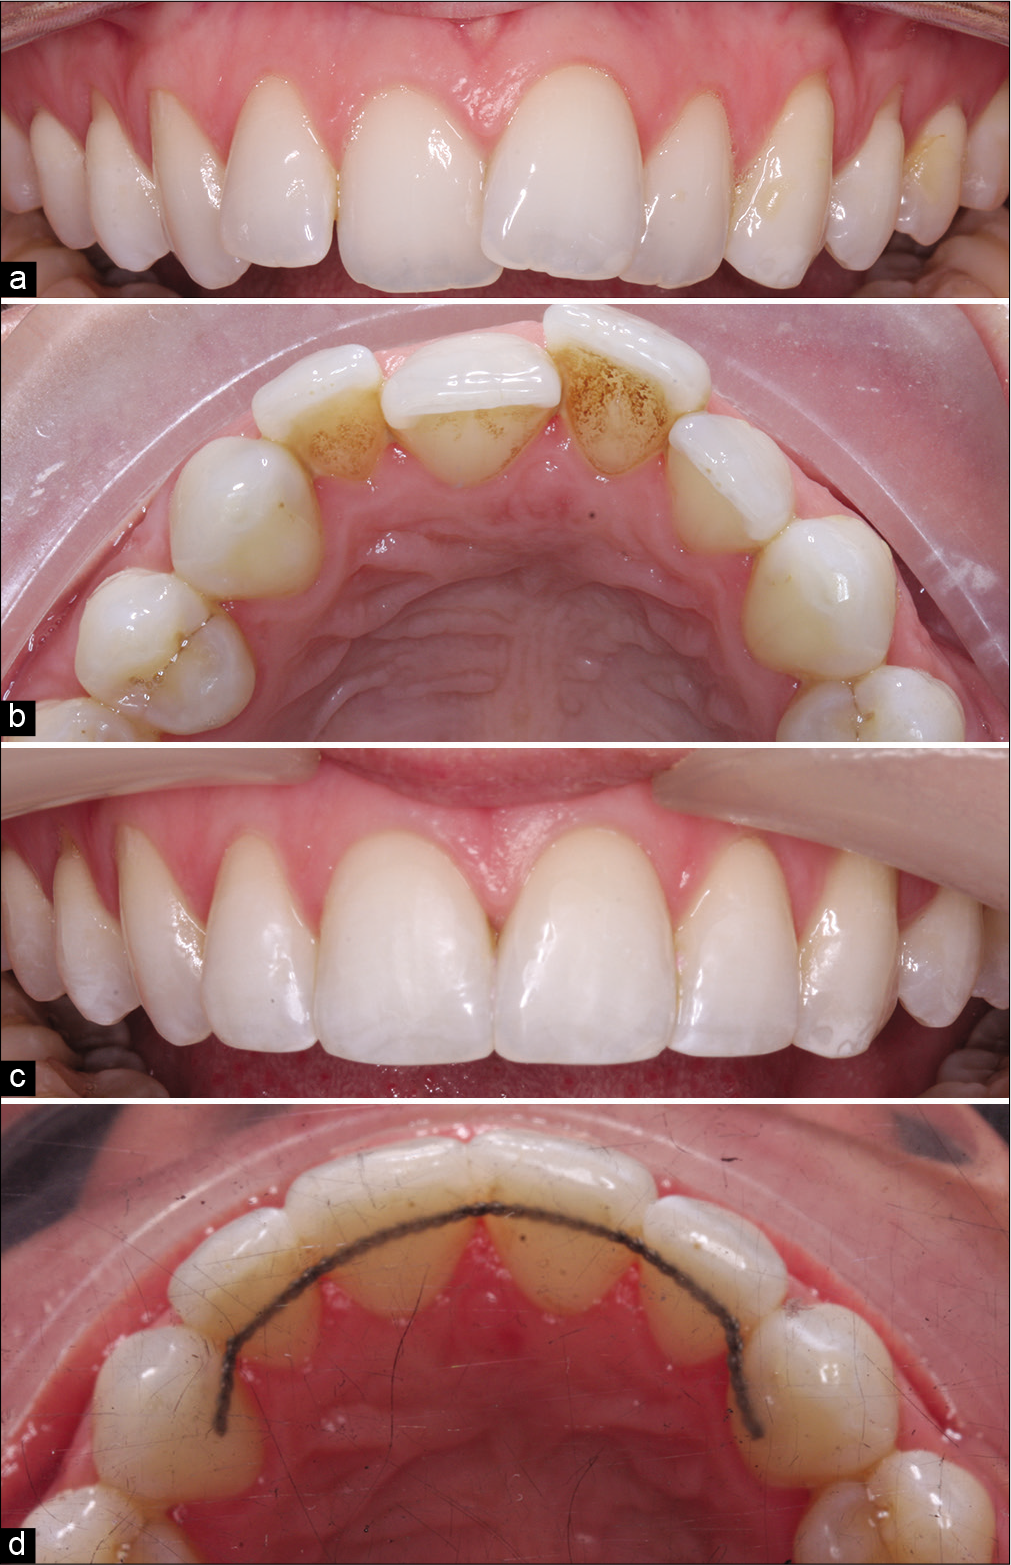 Malaligned upper anterior teeth (a, b) treated with a very brief phase of fixed appliance-based orthodontics (c, d). Treatment was undertaken over a period of just 33 days with appliances removed prematurely. While acceptable alignment of the incisors has been achieved, torque correction on 13 would necessitate more comprehensive treatment with full three-dimensional control.